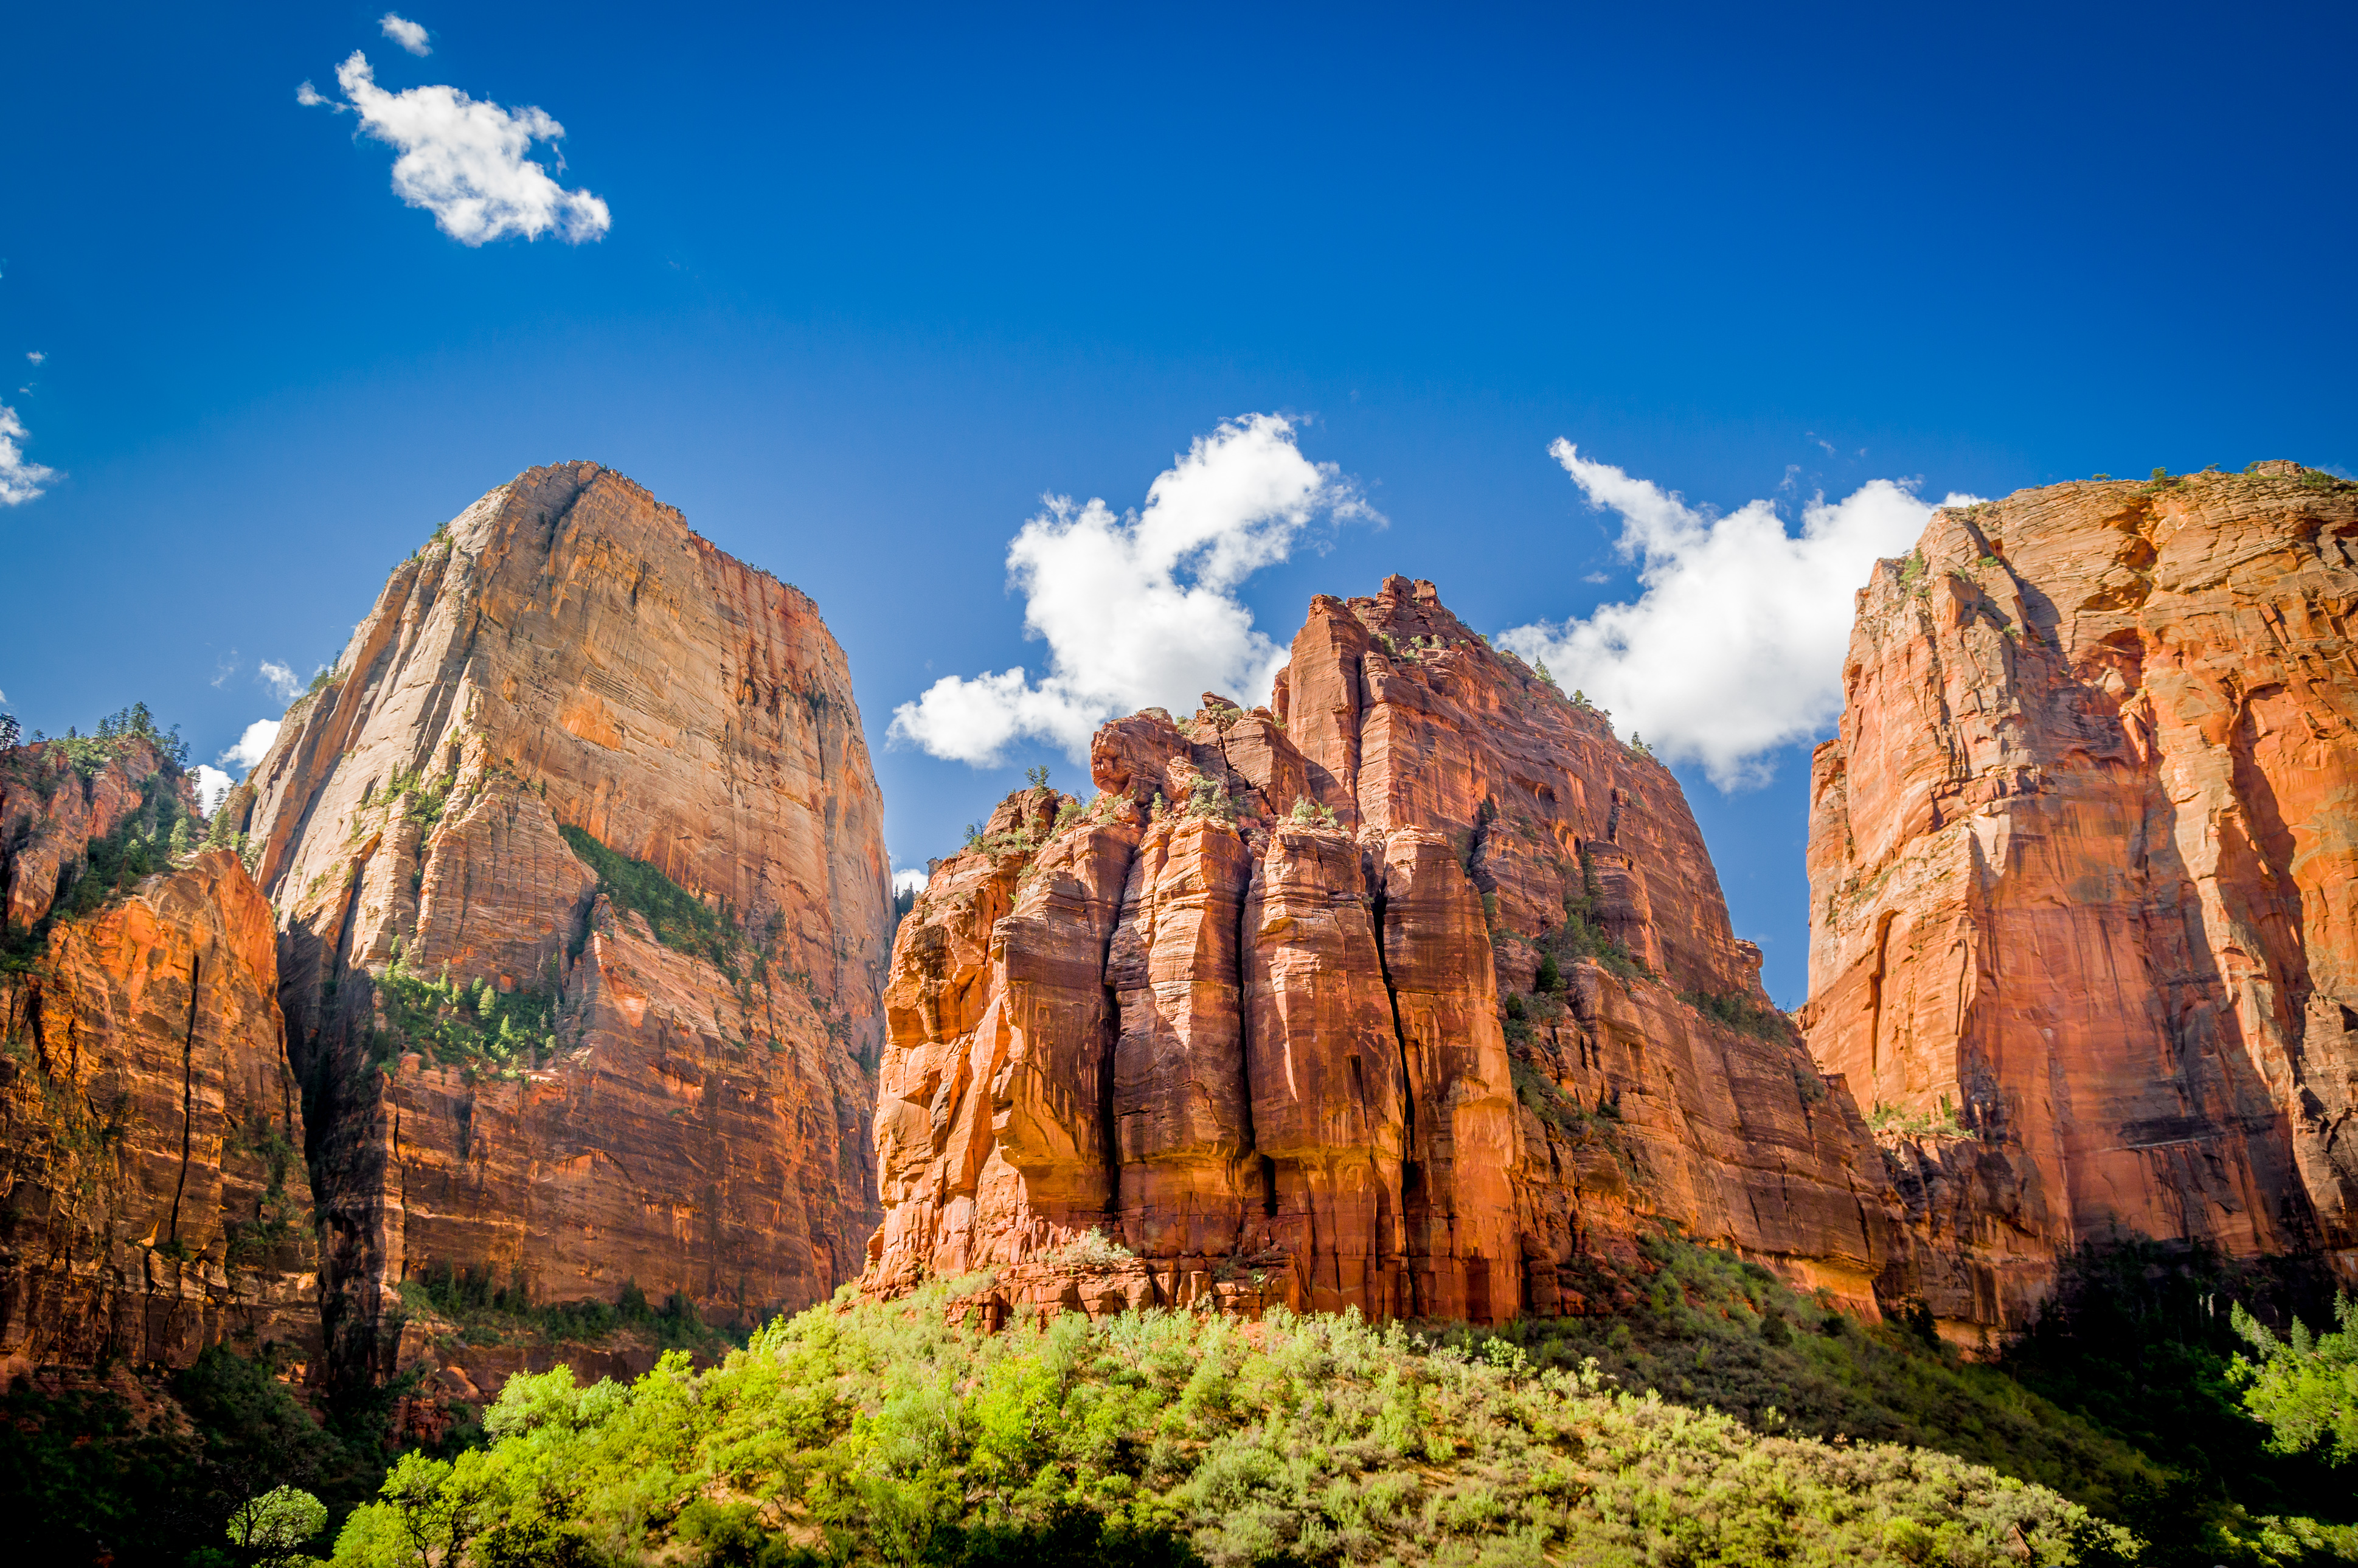 Love the Mountains? Check Out These Mountain Vacations! - The Mountains in Zion National Park